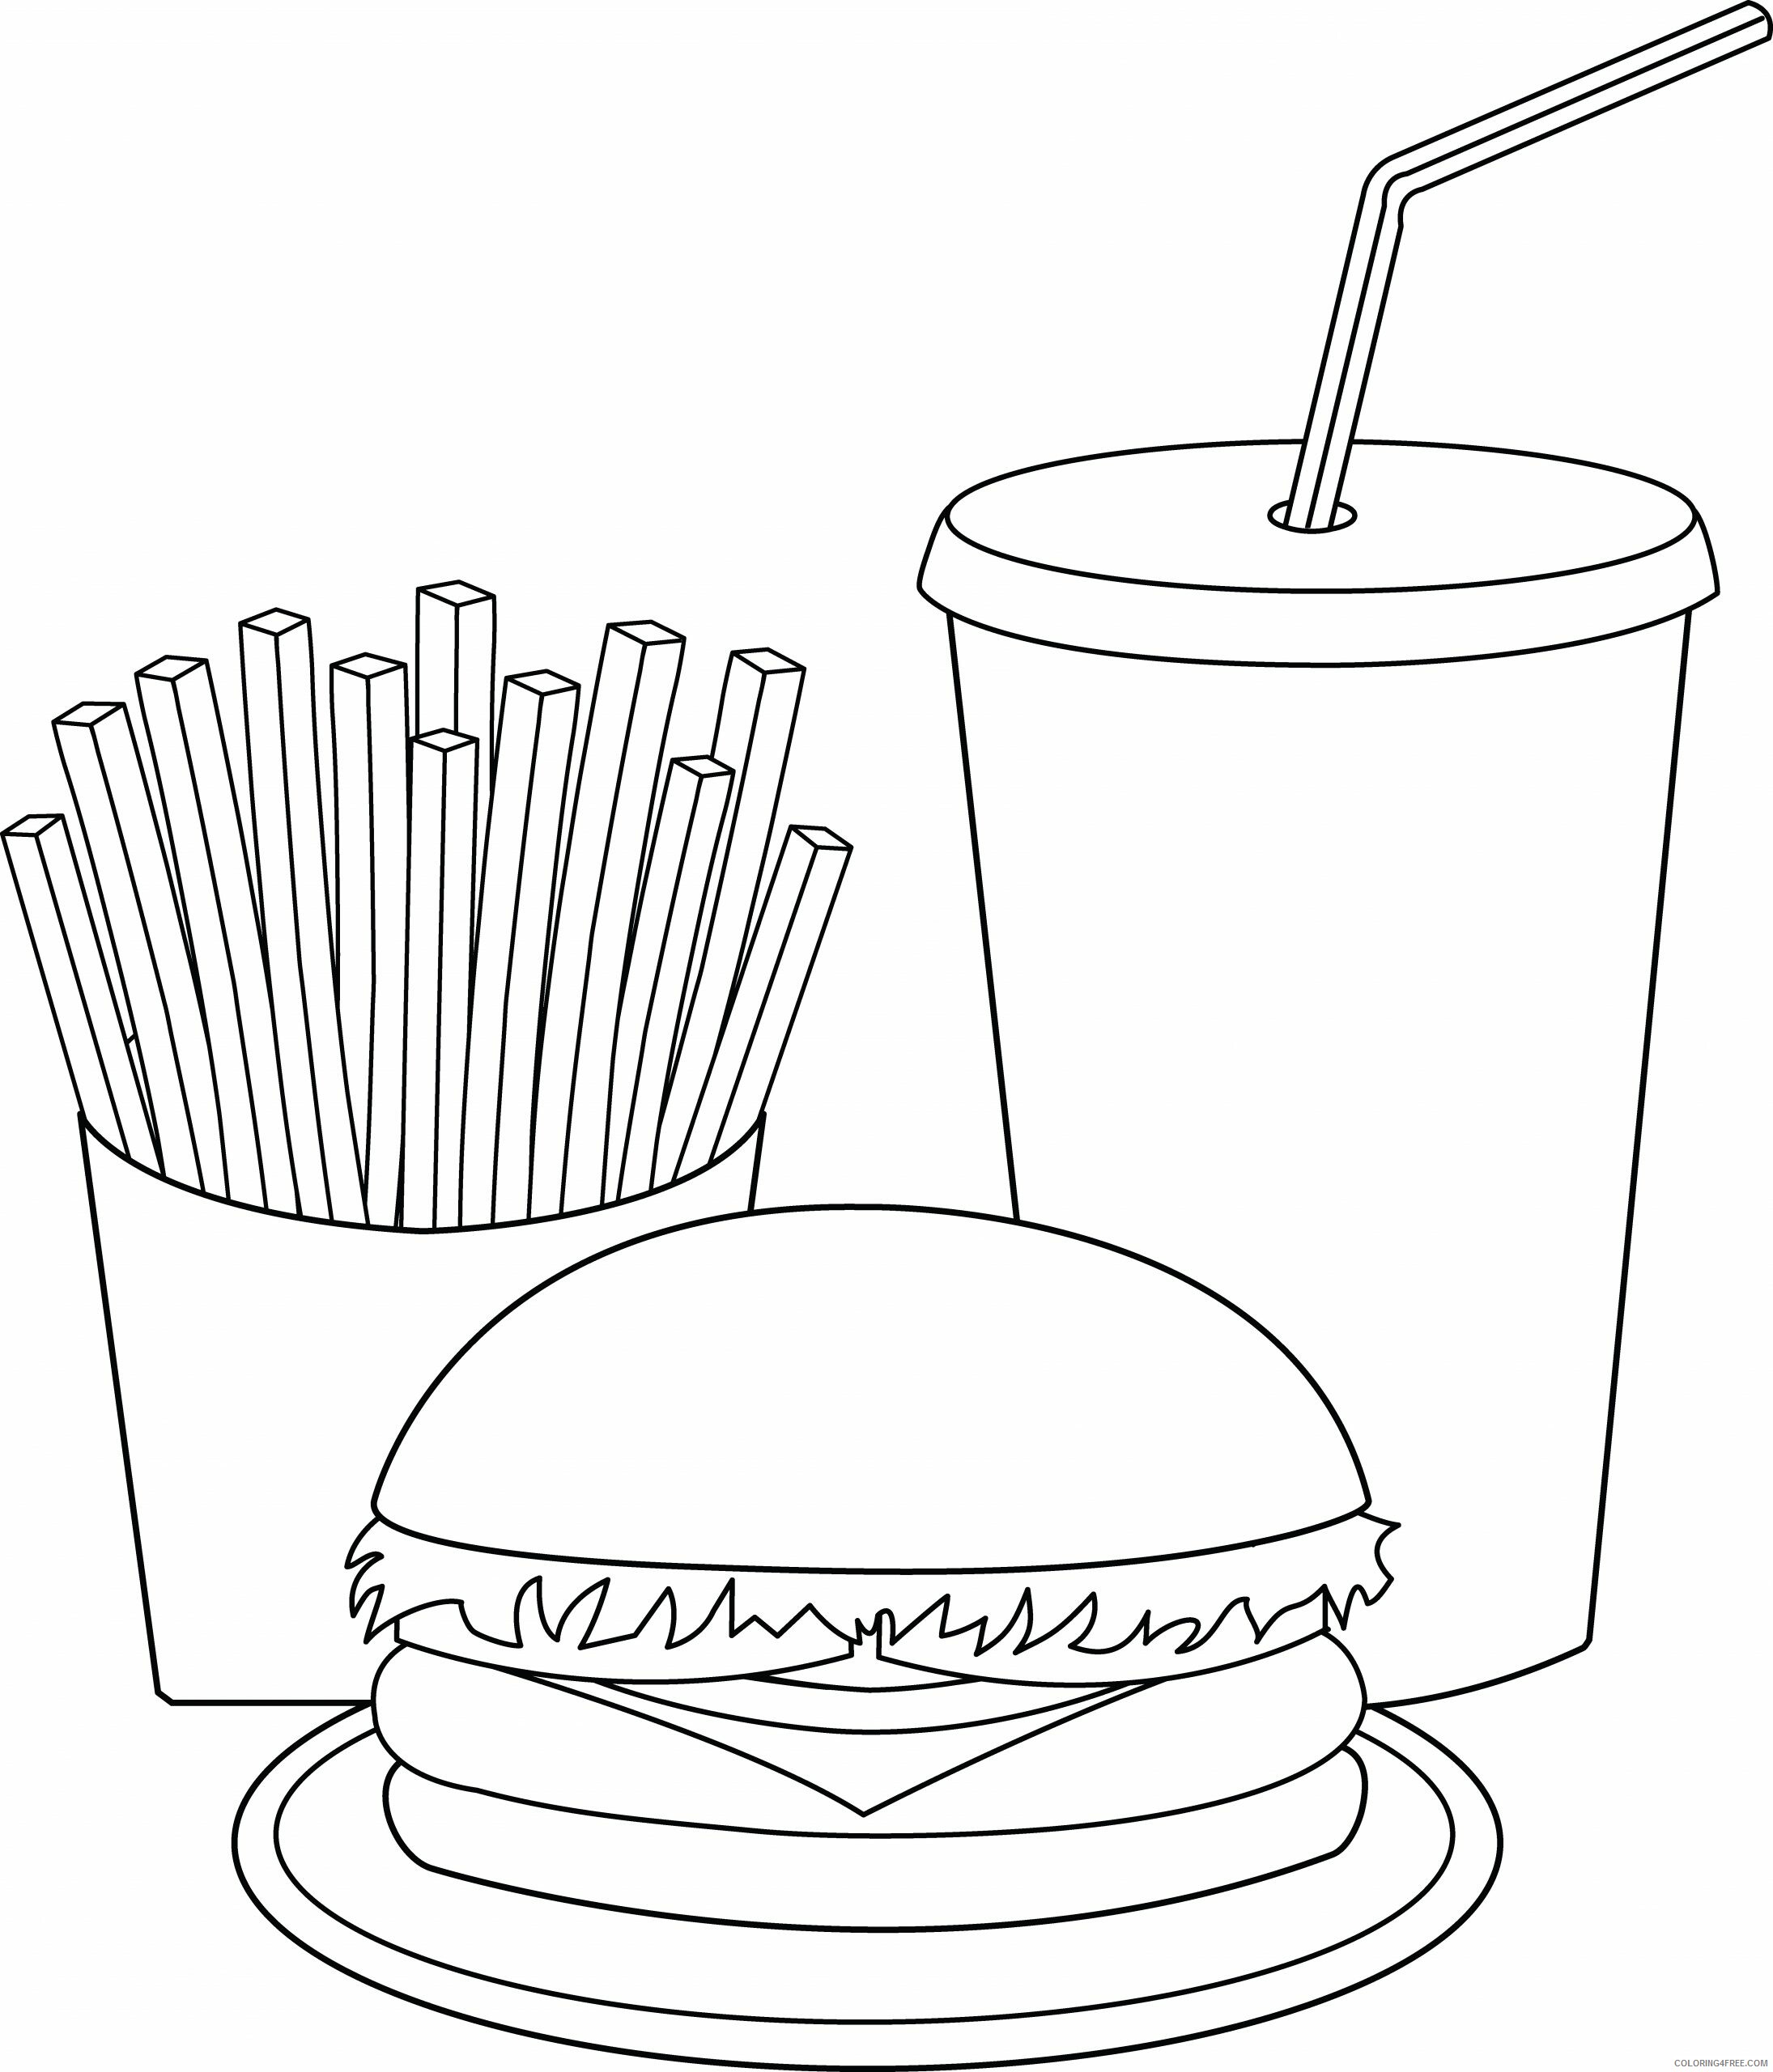 Food Coloring Pages Food Fast Food Hamburger Meal scaled Printable 2021 087 Coloring4free